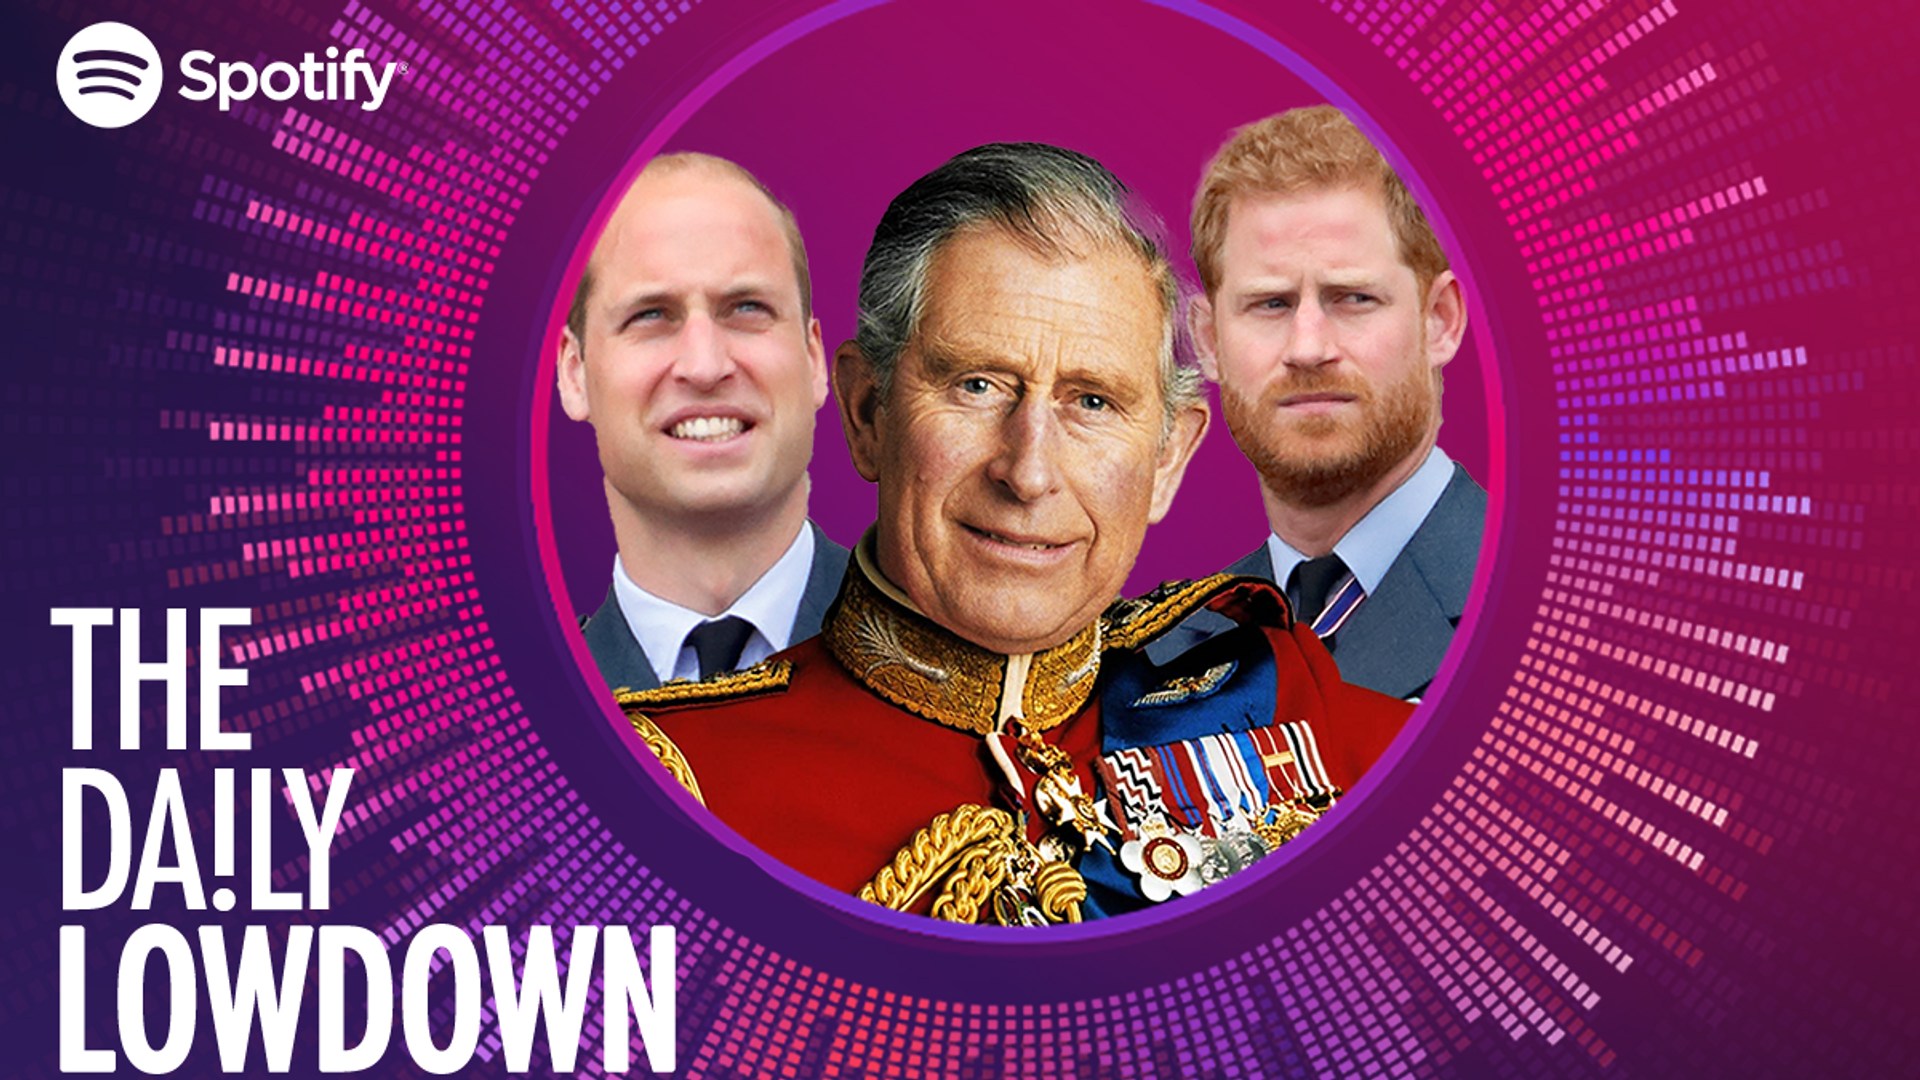 Prince William, King Charles, Prince Harry in Daily Lowdown logo